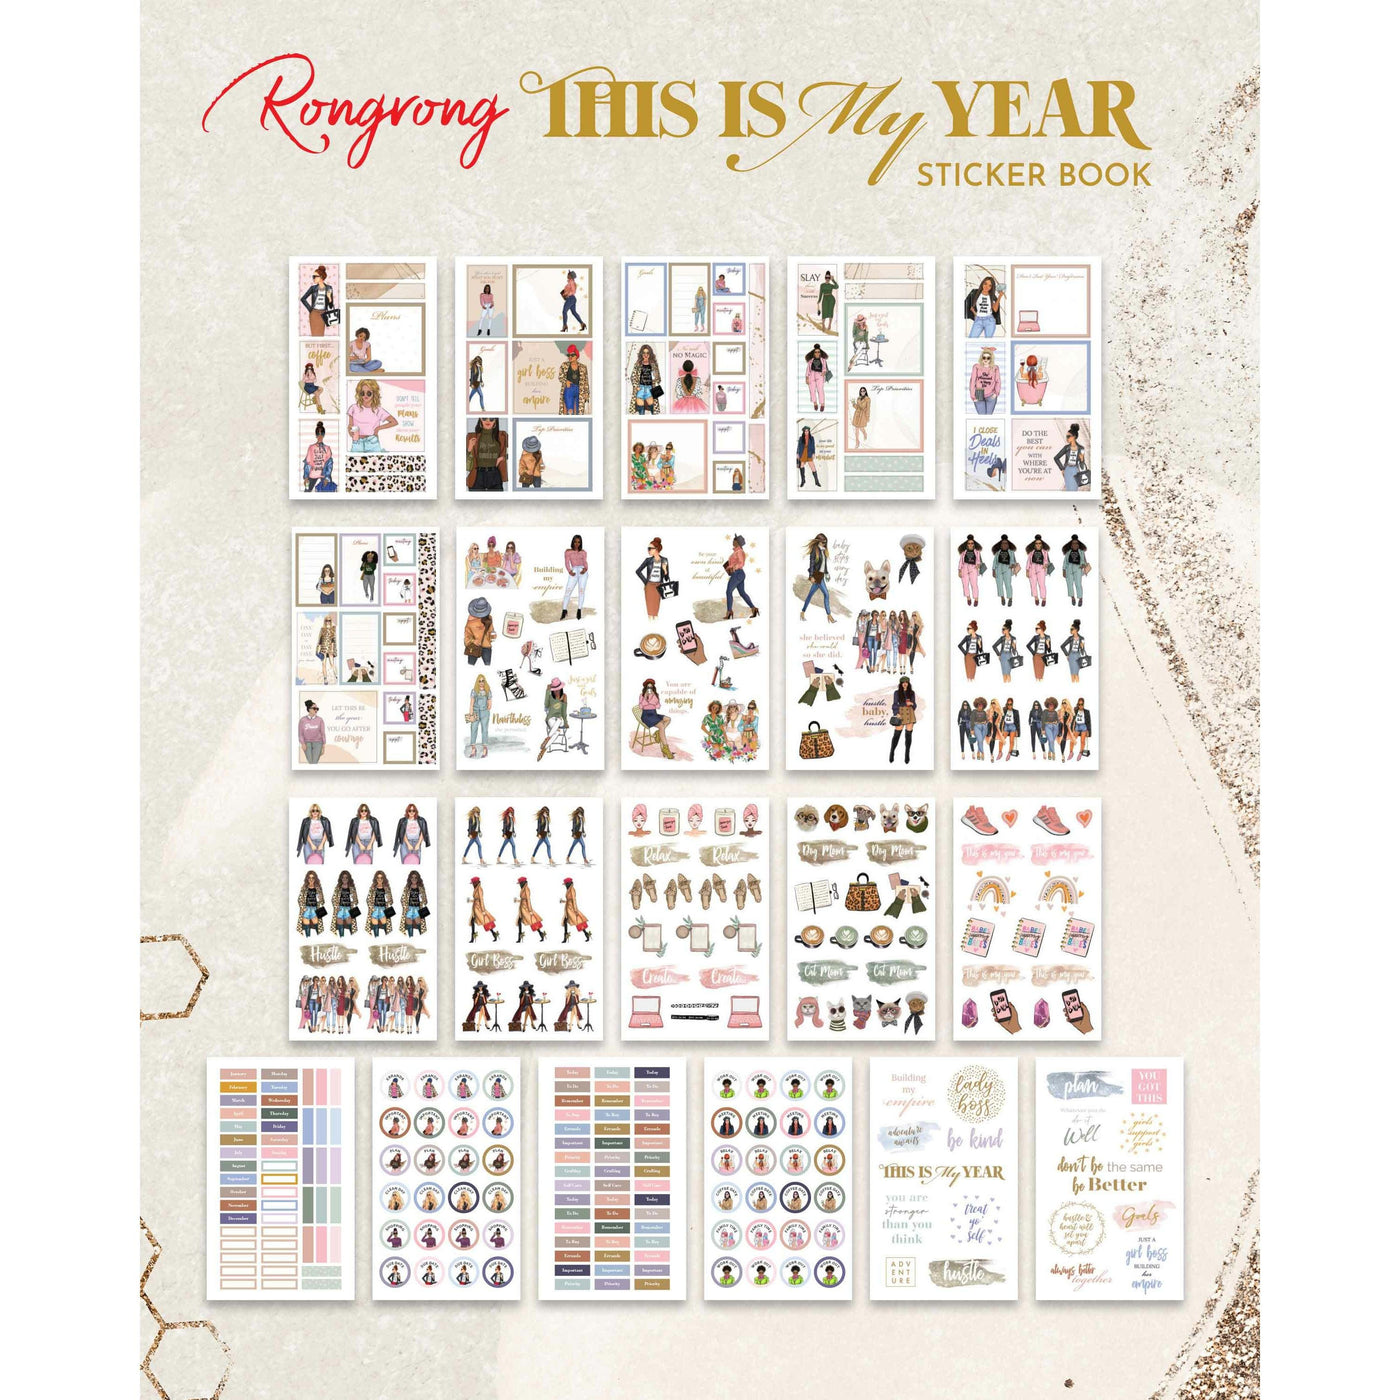 Rongrong This is My Year Sticker Book - Shop Rongrong